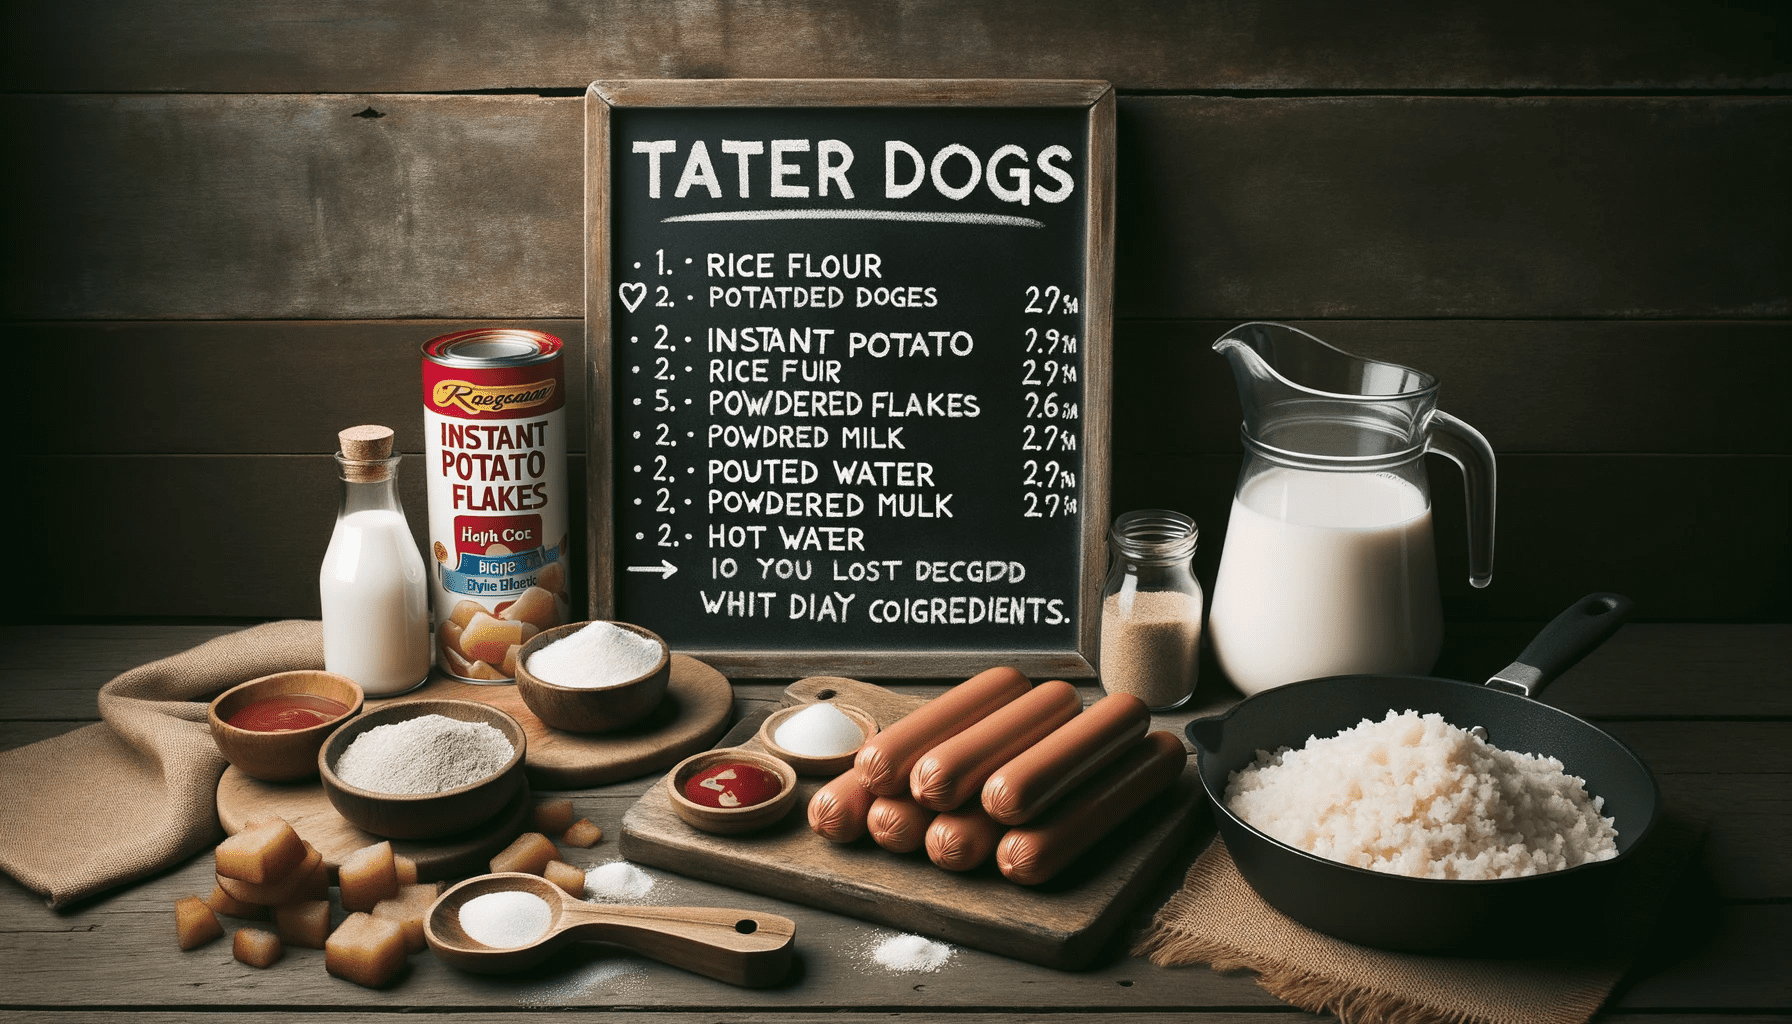 Tater Dogs